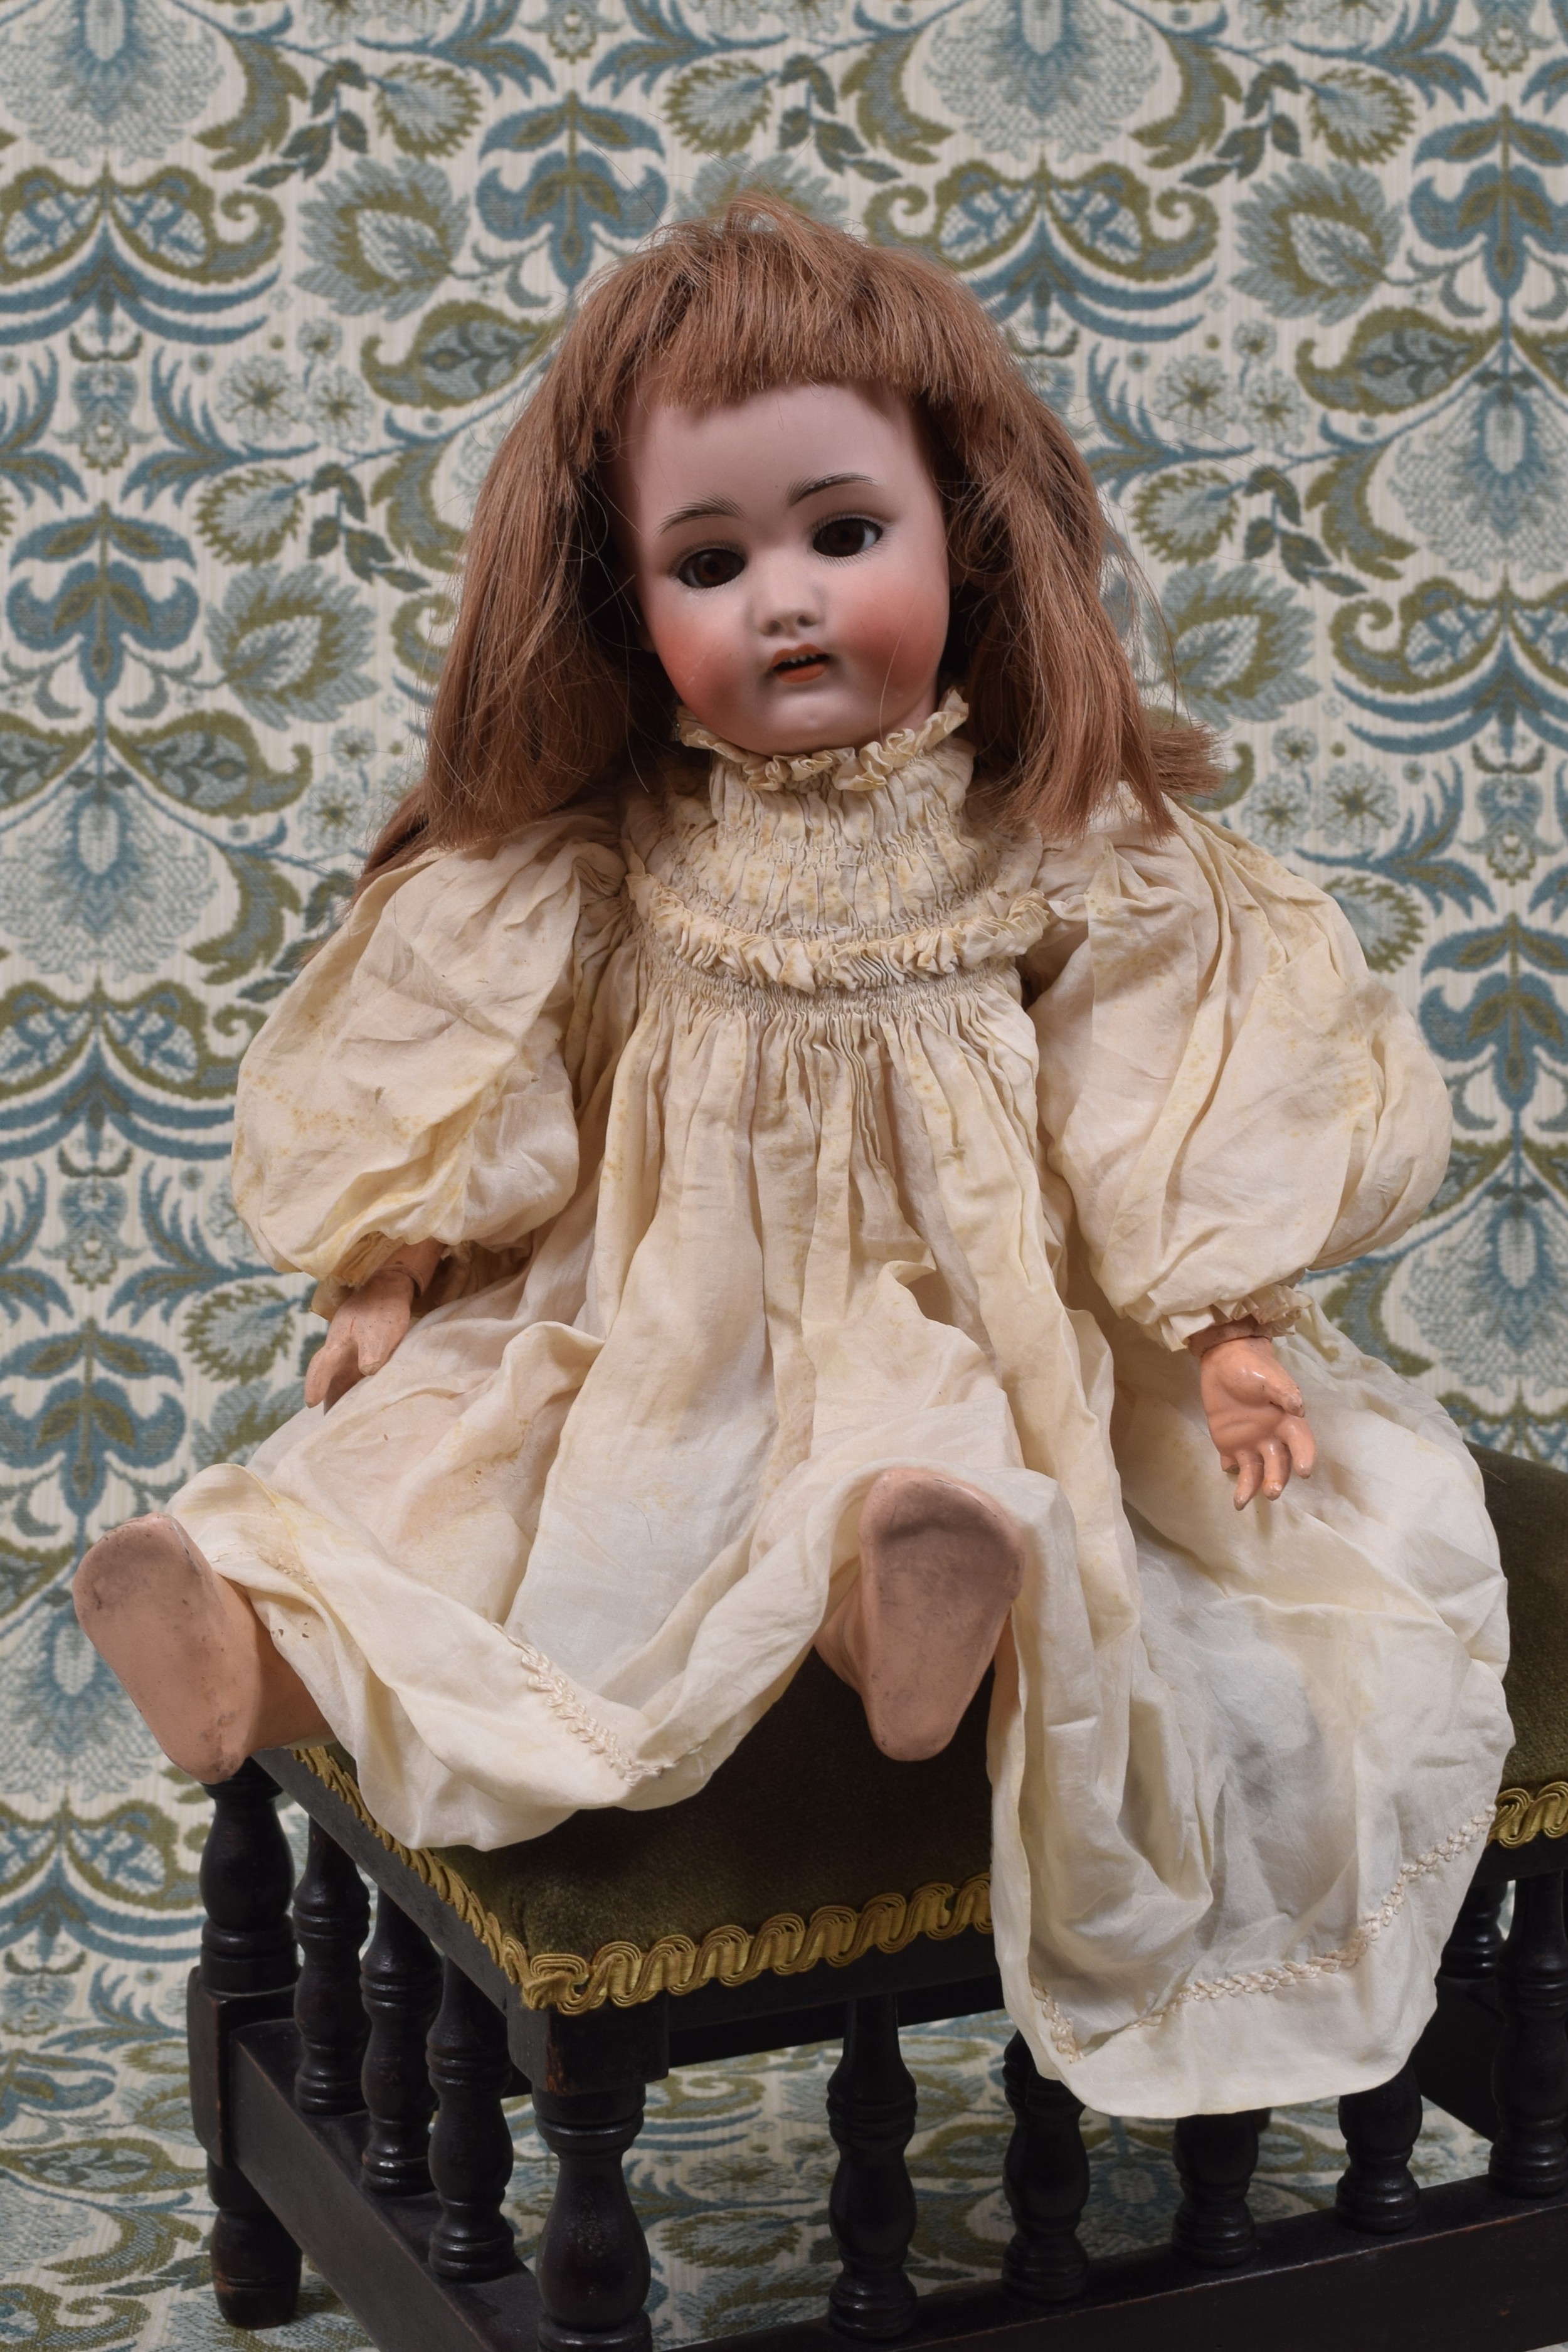 A Simon & Halbig (Germany) bisque head and painted ball jointed composition bodied doll, the